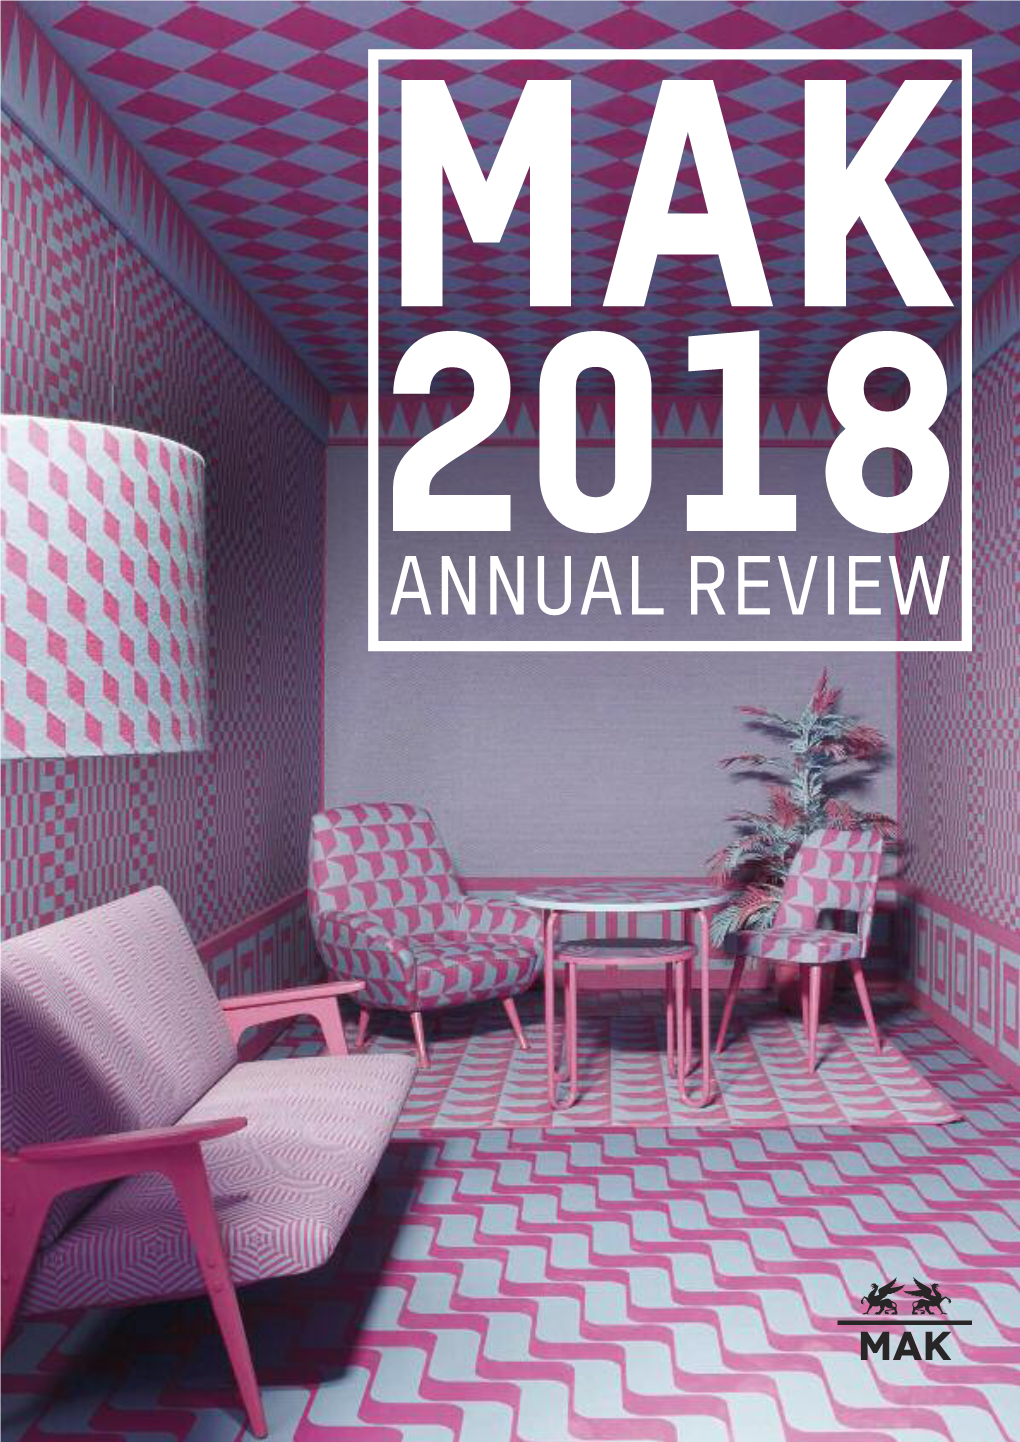 ANNUAL REVIEW Contents